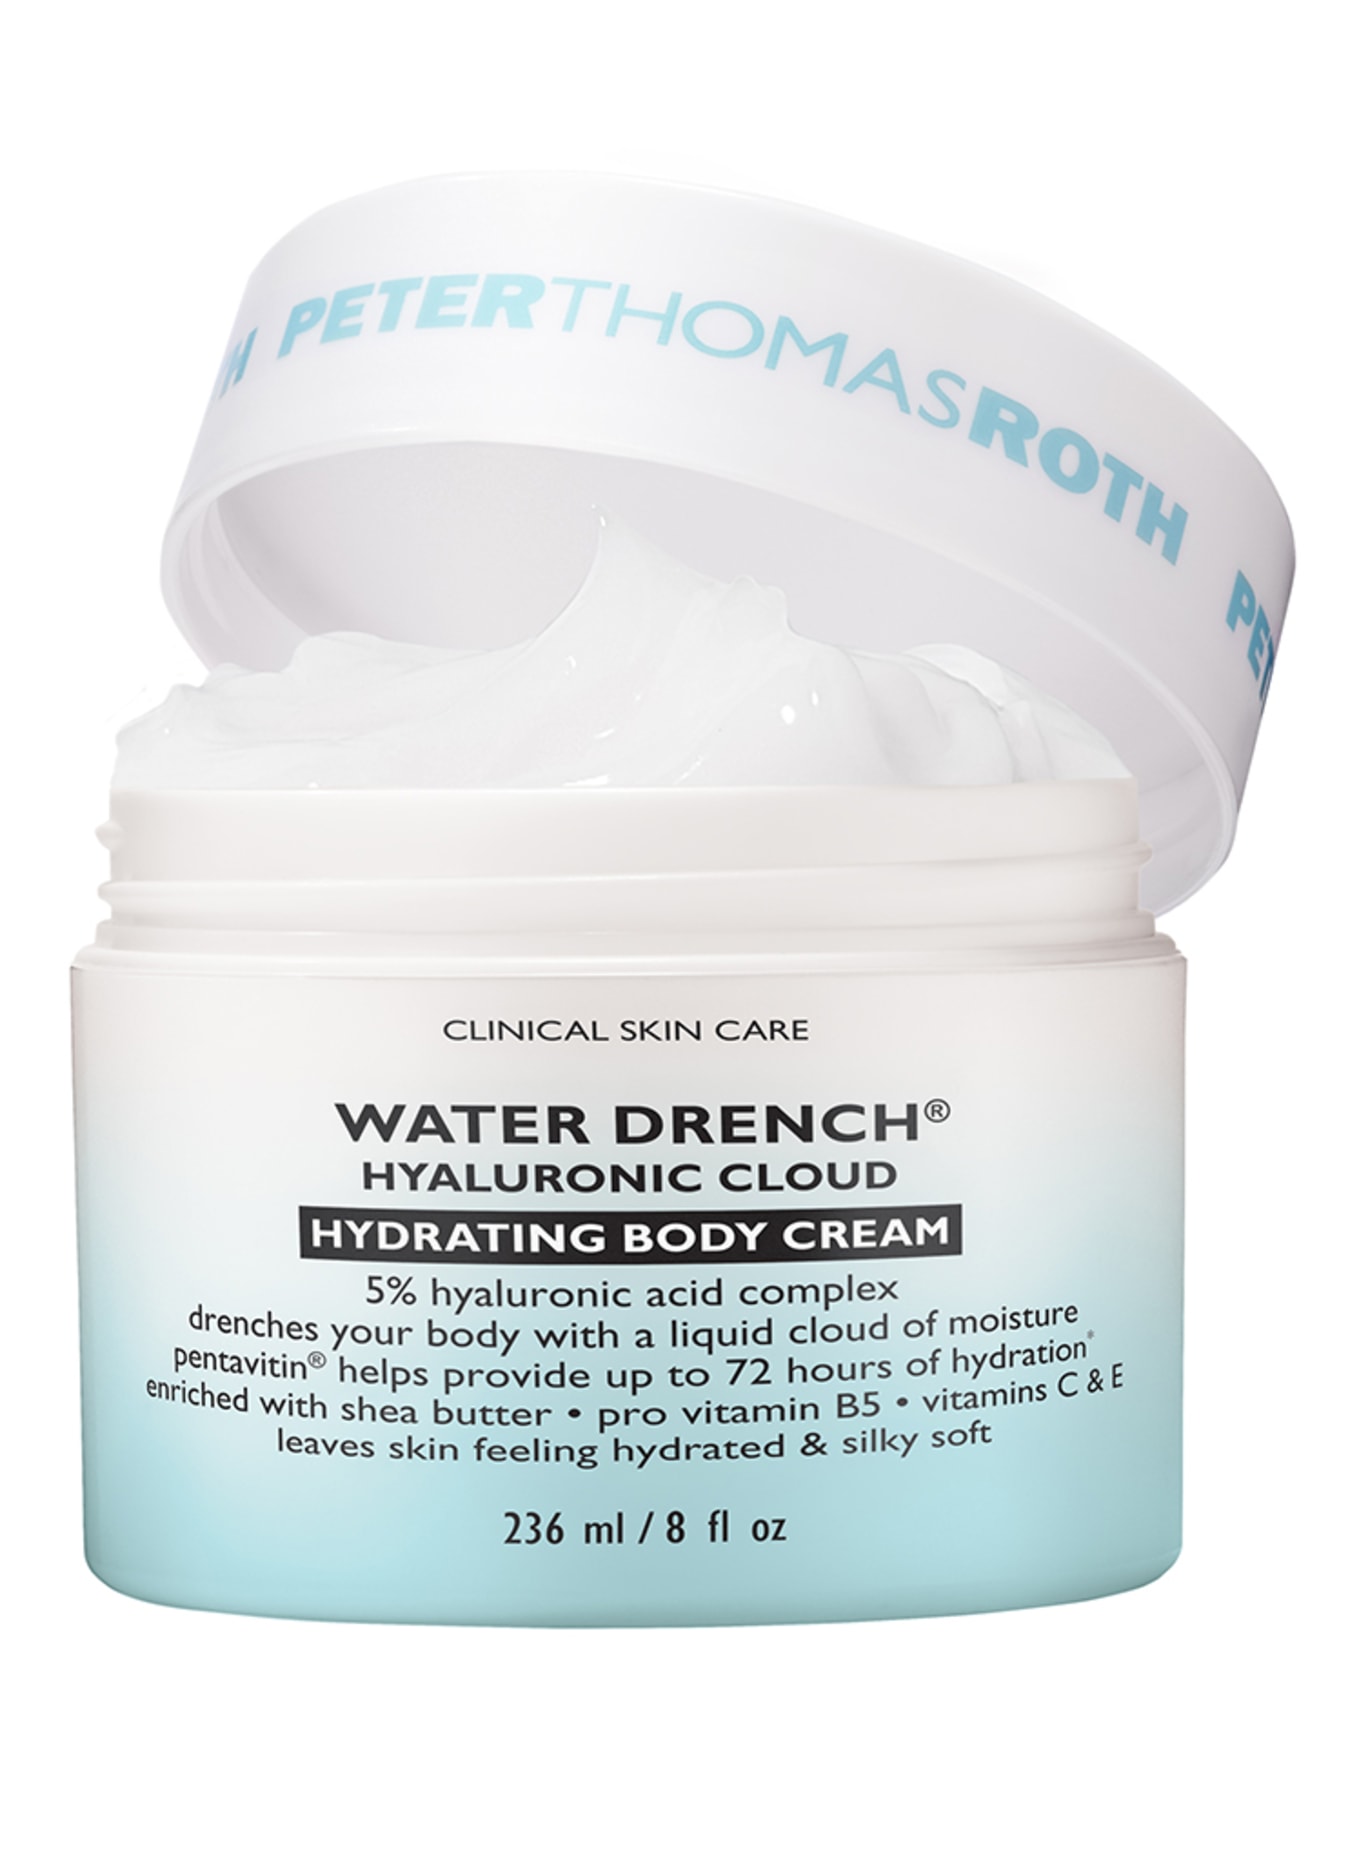 PETER THOMAS ROTH WATER DRENCH® HYALURONIC CLOUD (Obrázek 2)